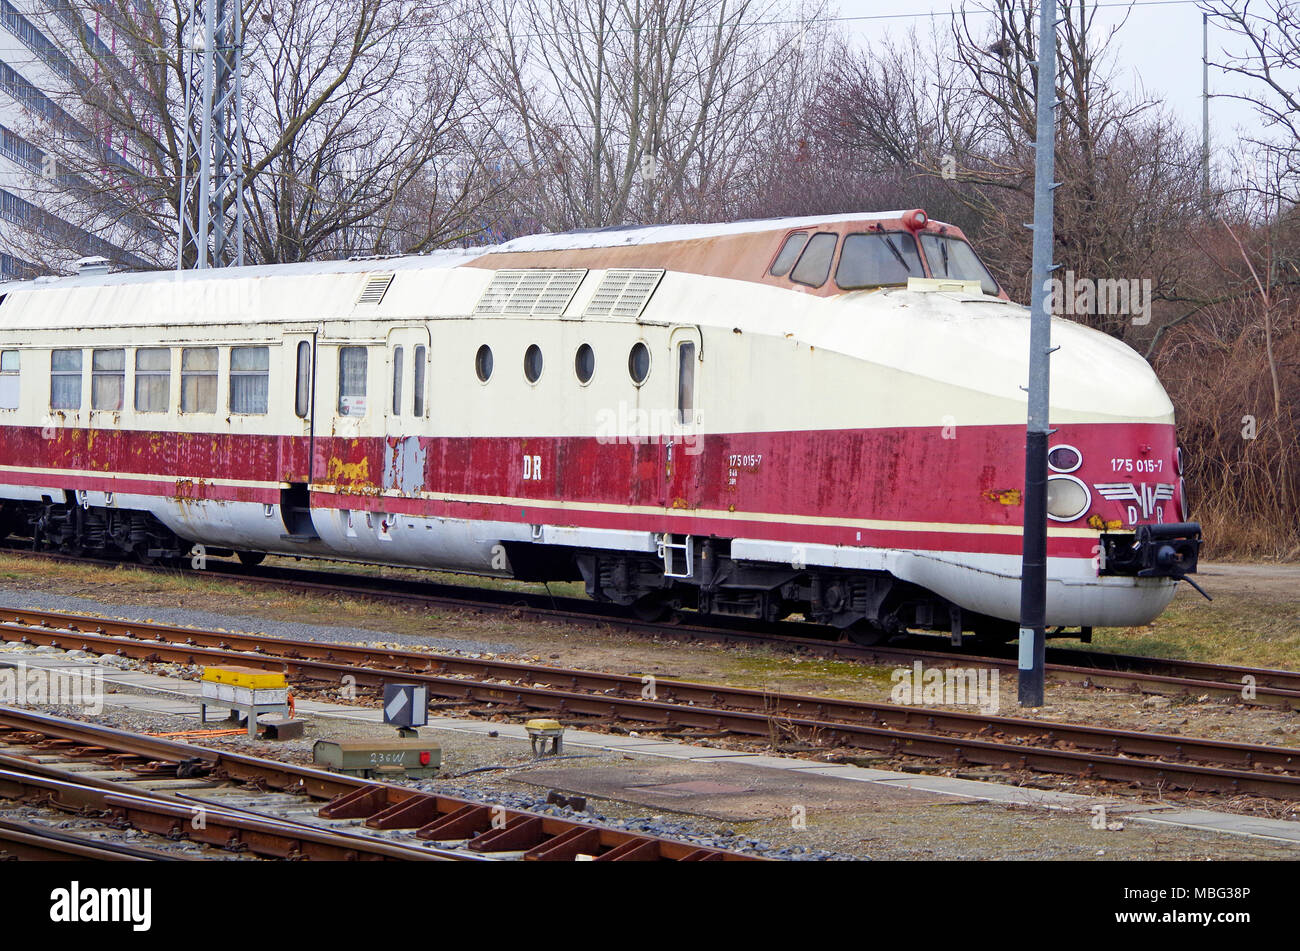 Deutsches Reichsbahn train no 175 015-7 a four carriage train with cabs and engines at both ends, in the process of being restored. Stock Photo